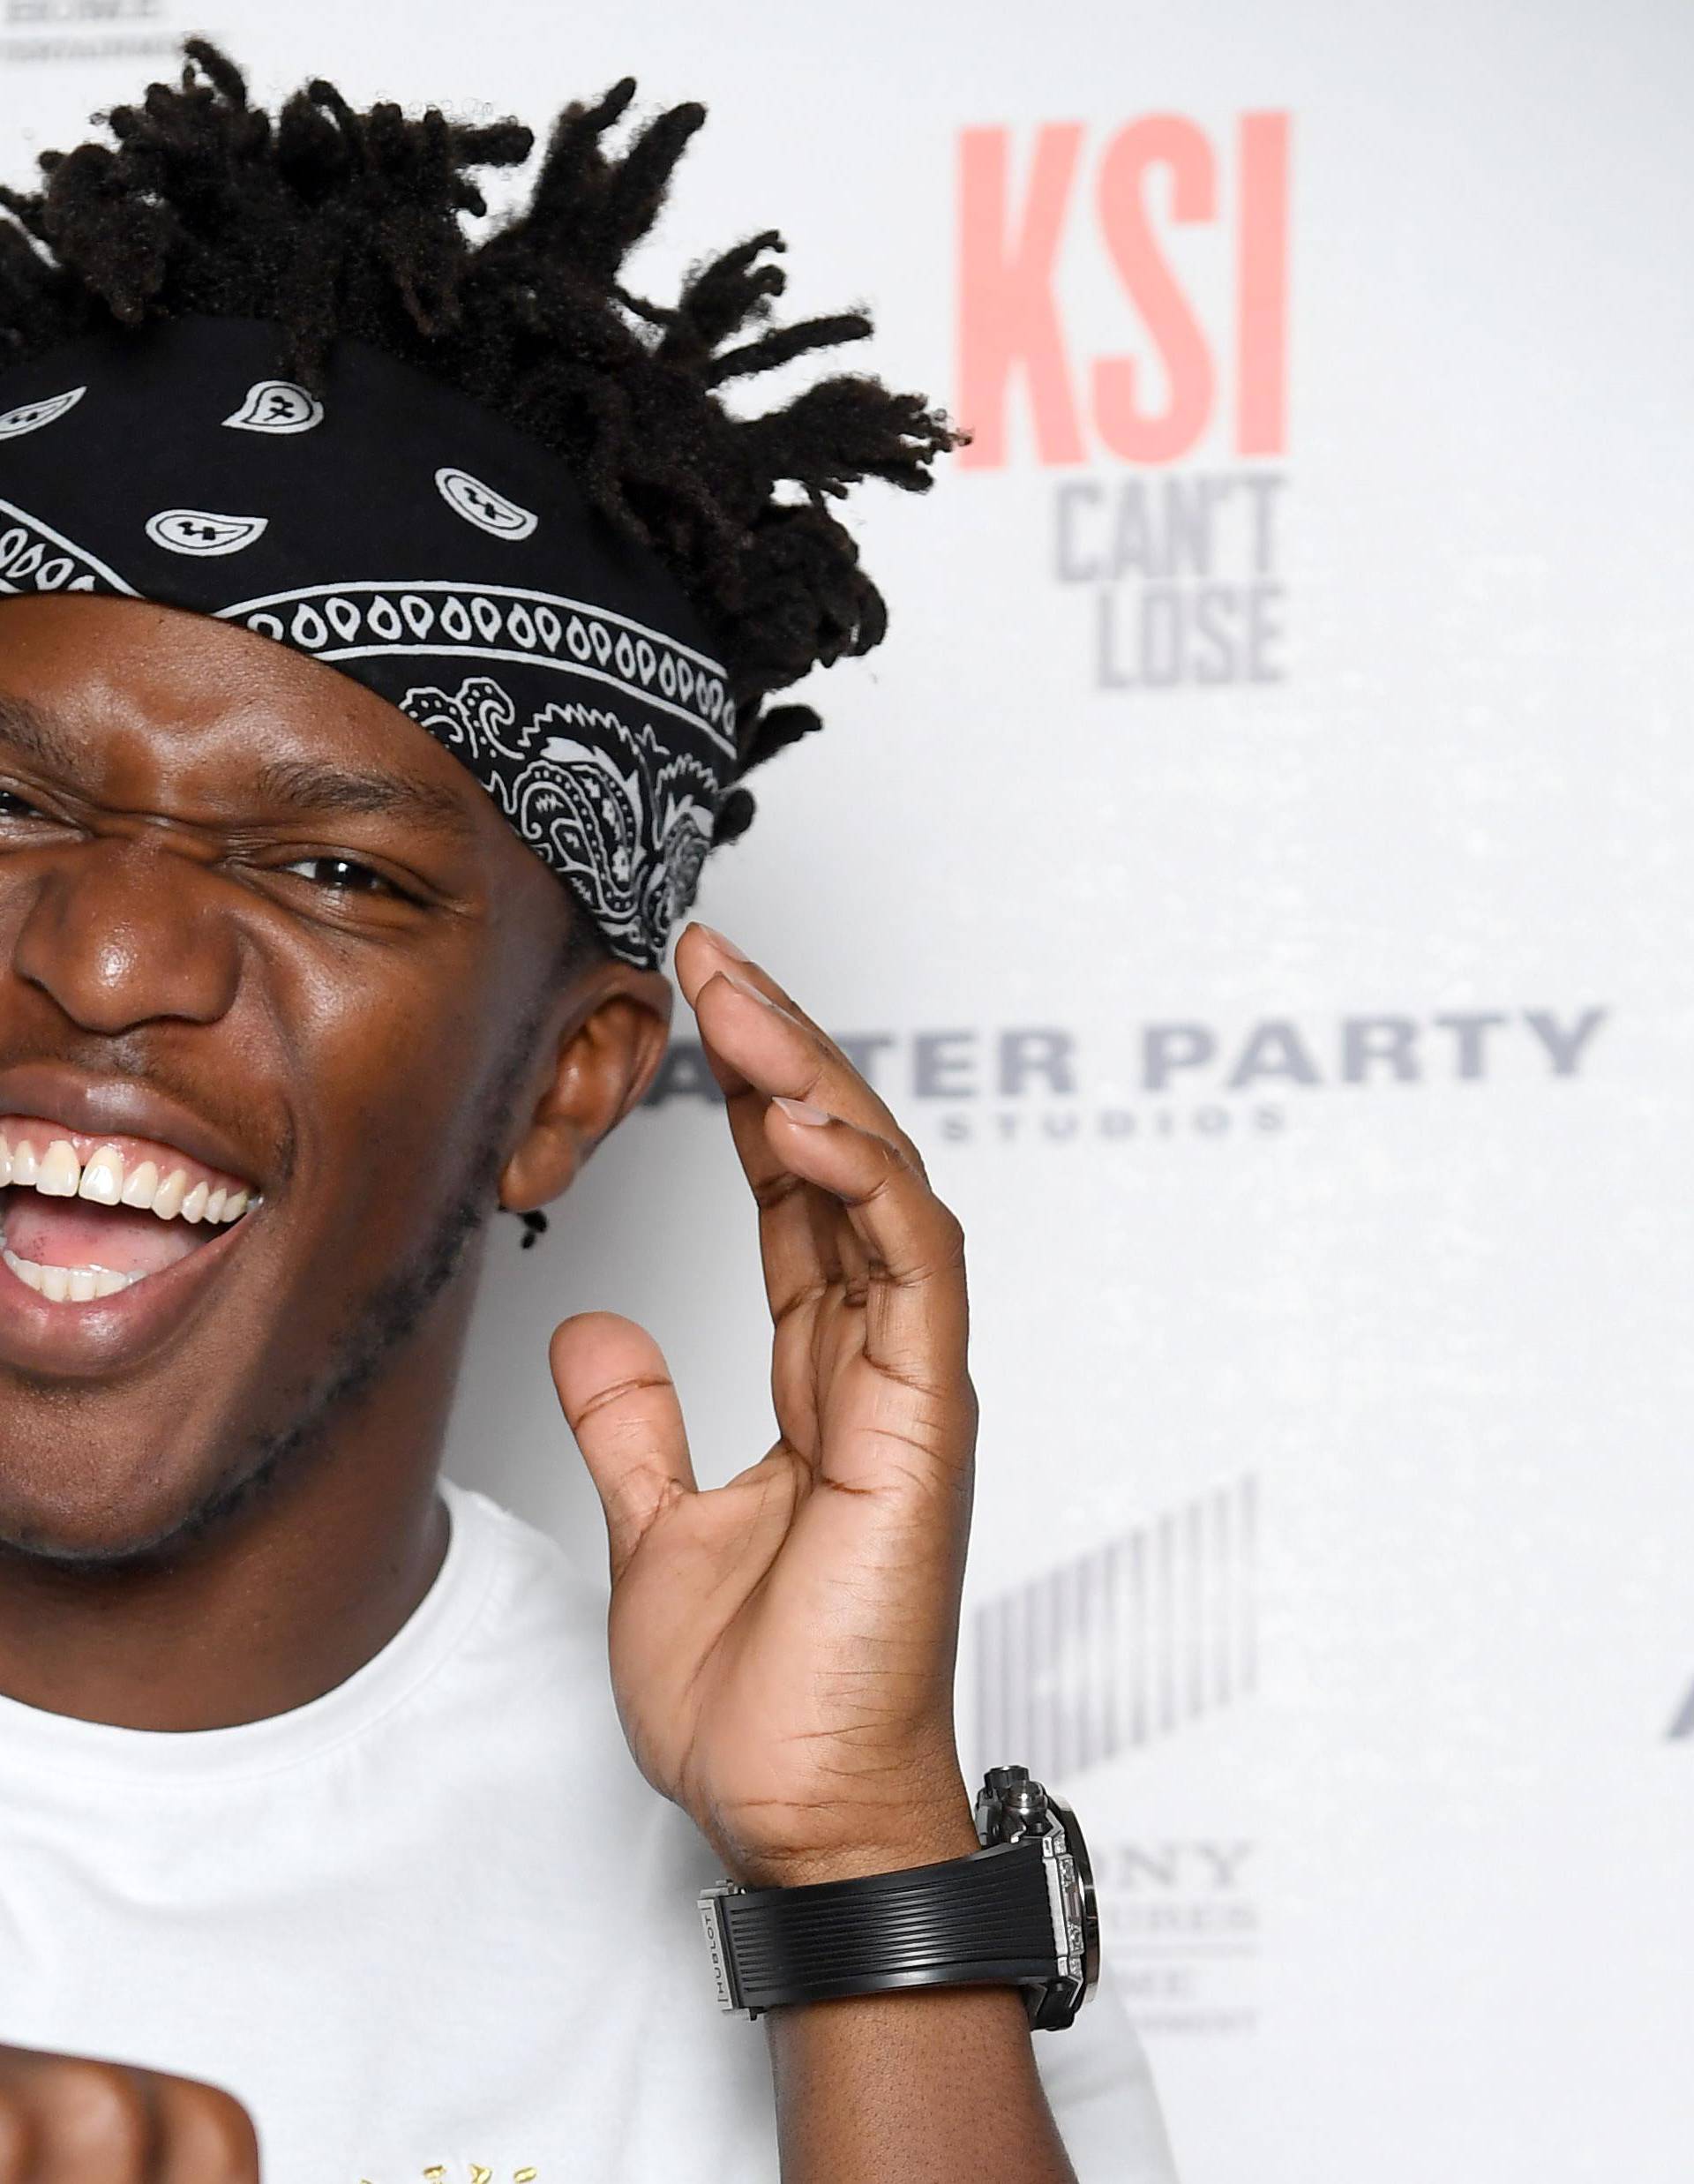 'KSI: Can't Lose' Documentary World Premiere - Arrivals